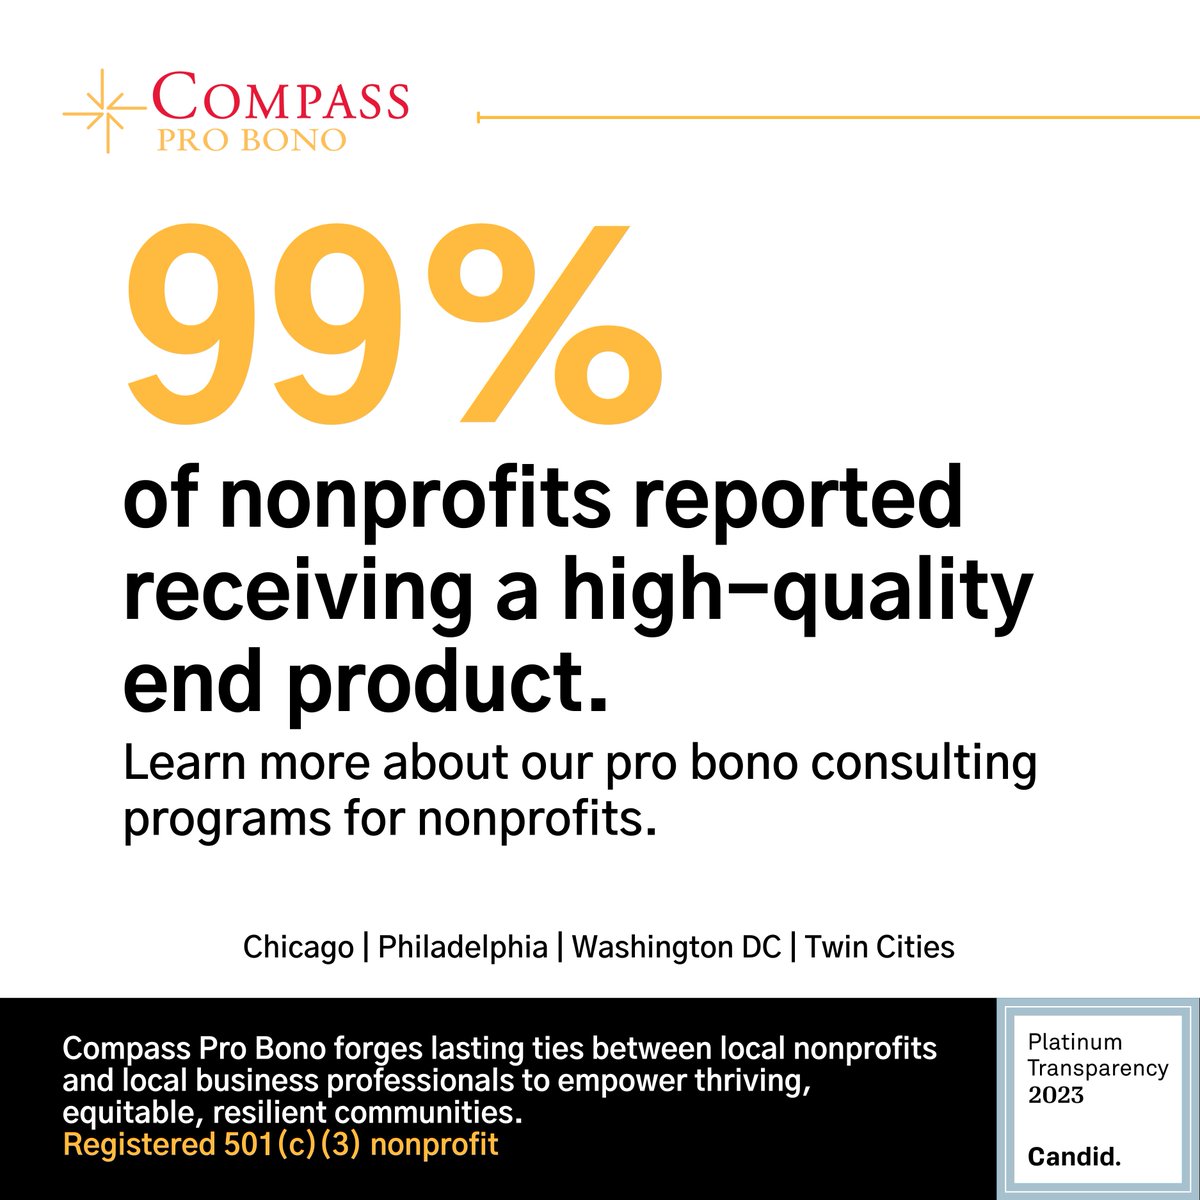 Attention nonprofits! Interested in receiving high-quality consulting services for free? Deadlines coming up for #TwinCities (10/27) + #Philadelphia (11/17) Twin Cities: bit.ly/TC-np22 Philly: bit.ly/PH-np22 Philly info session: bit.ly/45DUXu0